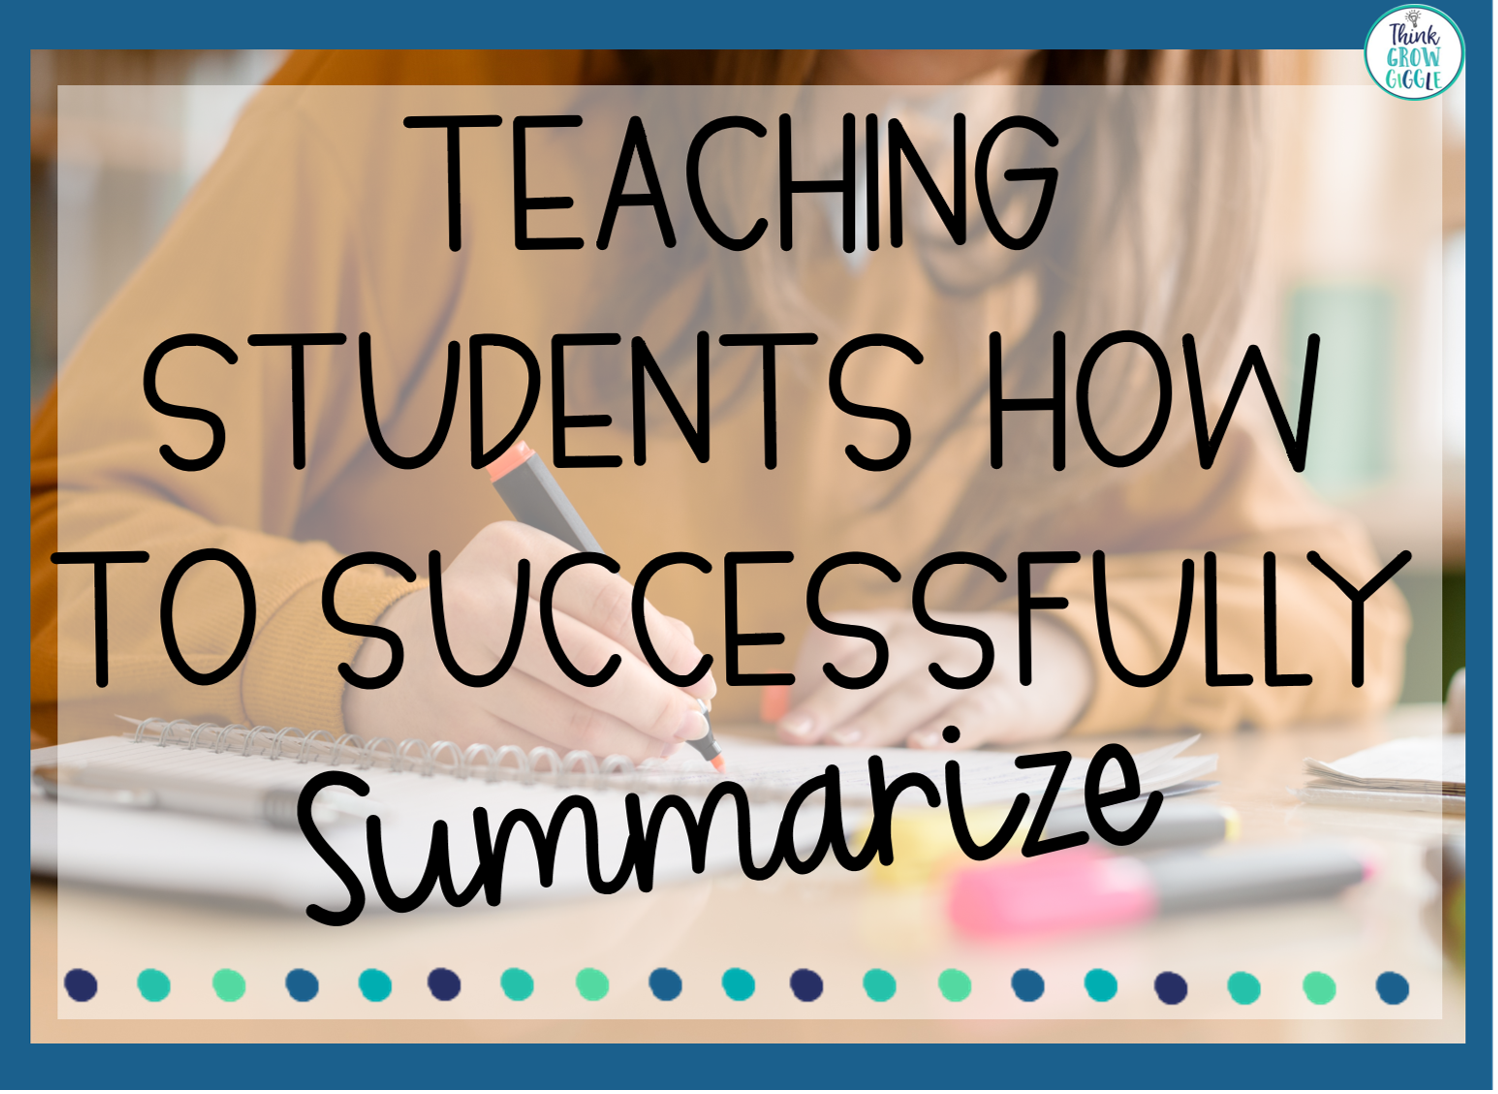 This contains an image of: 4 Ways to Help Students Successfully Summarize